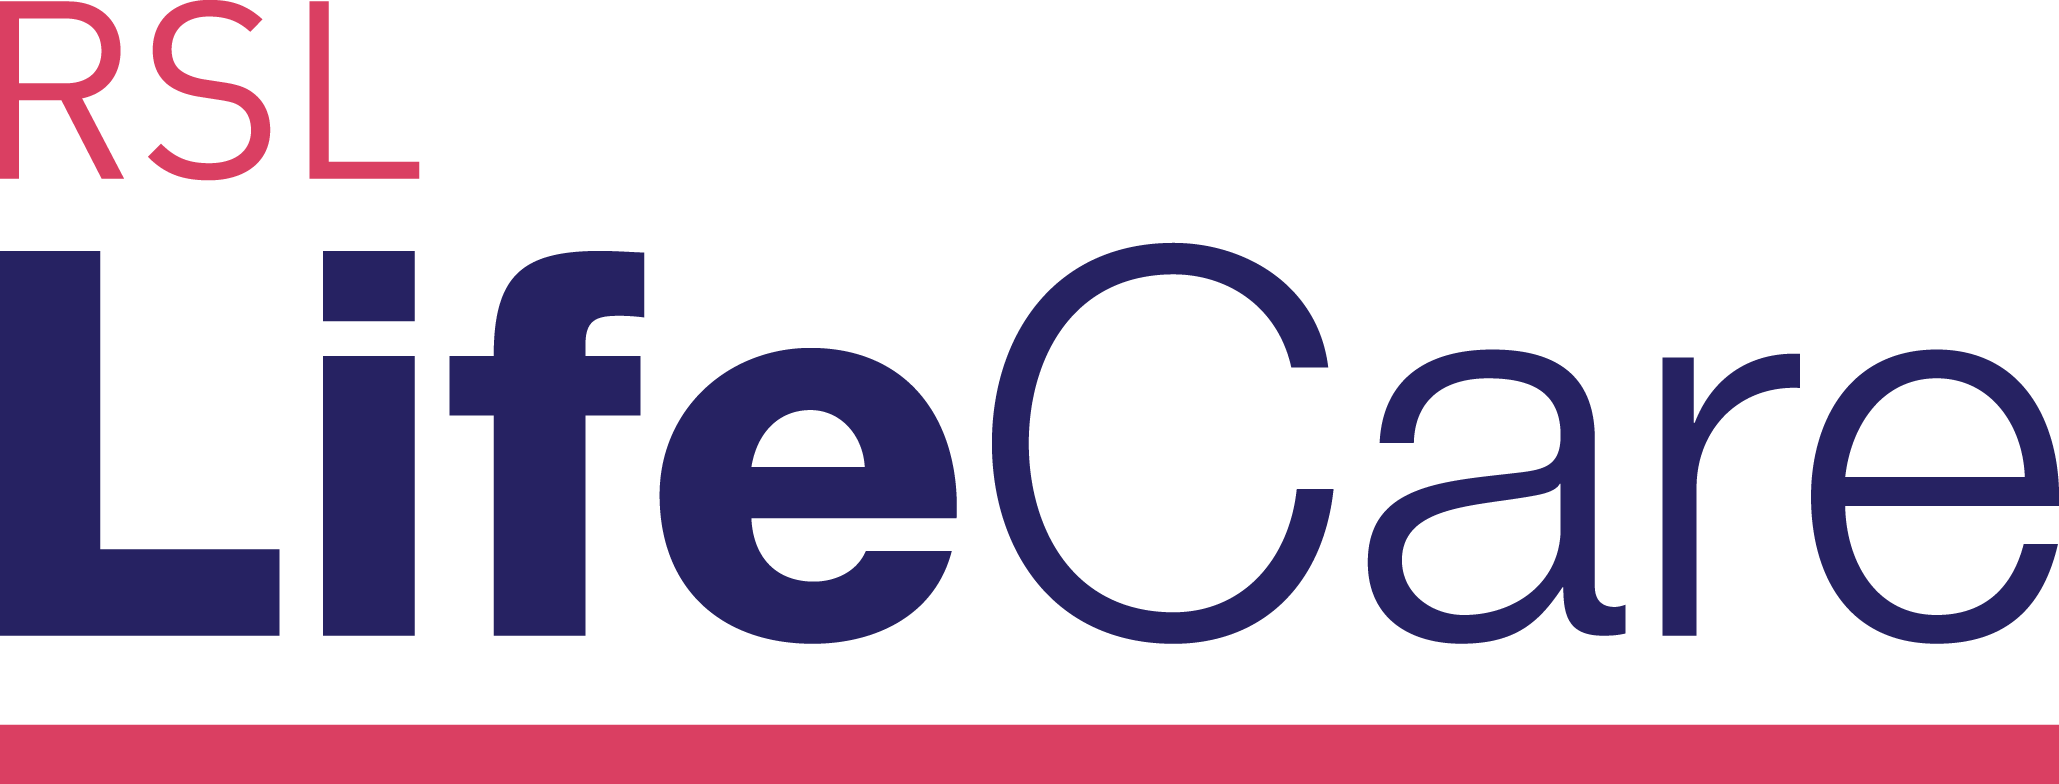 RSL LifeCare ANZAC Village - Residential Aged Care Homes logo